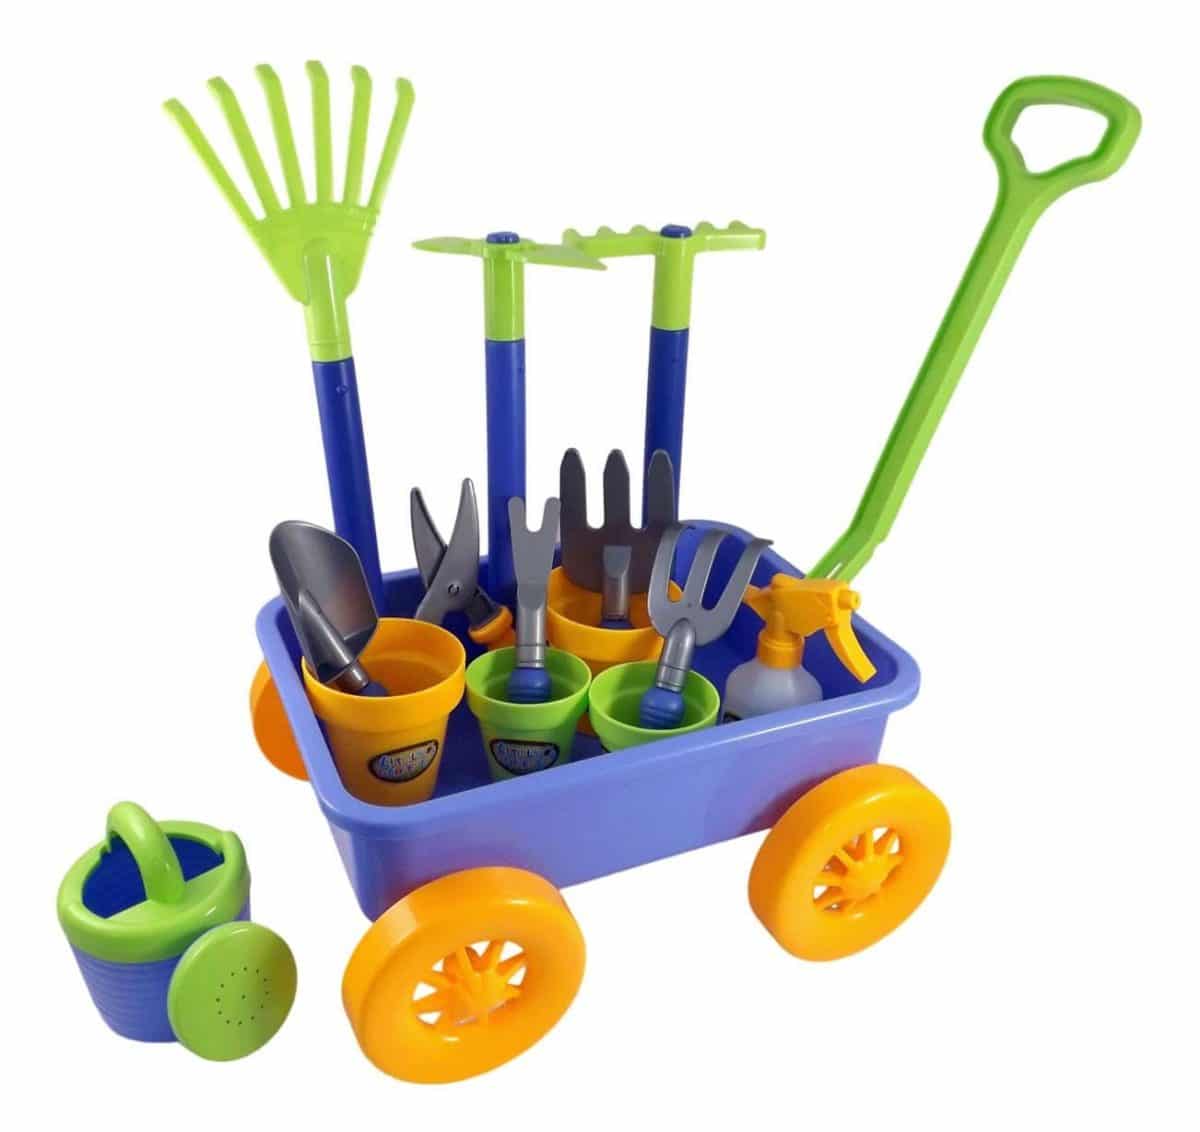 Indoor Gardening Kit 1 Count by Green Toys